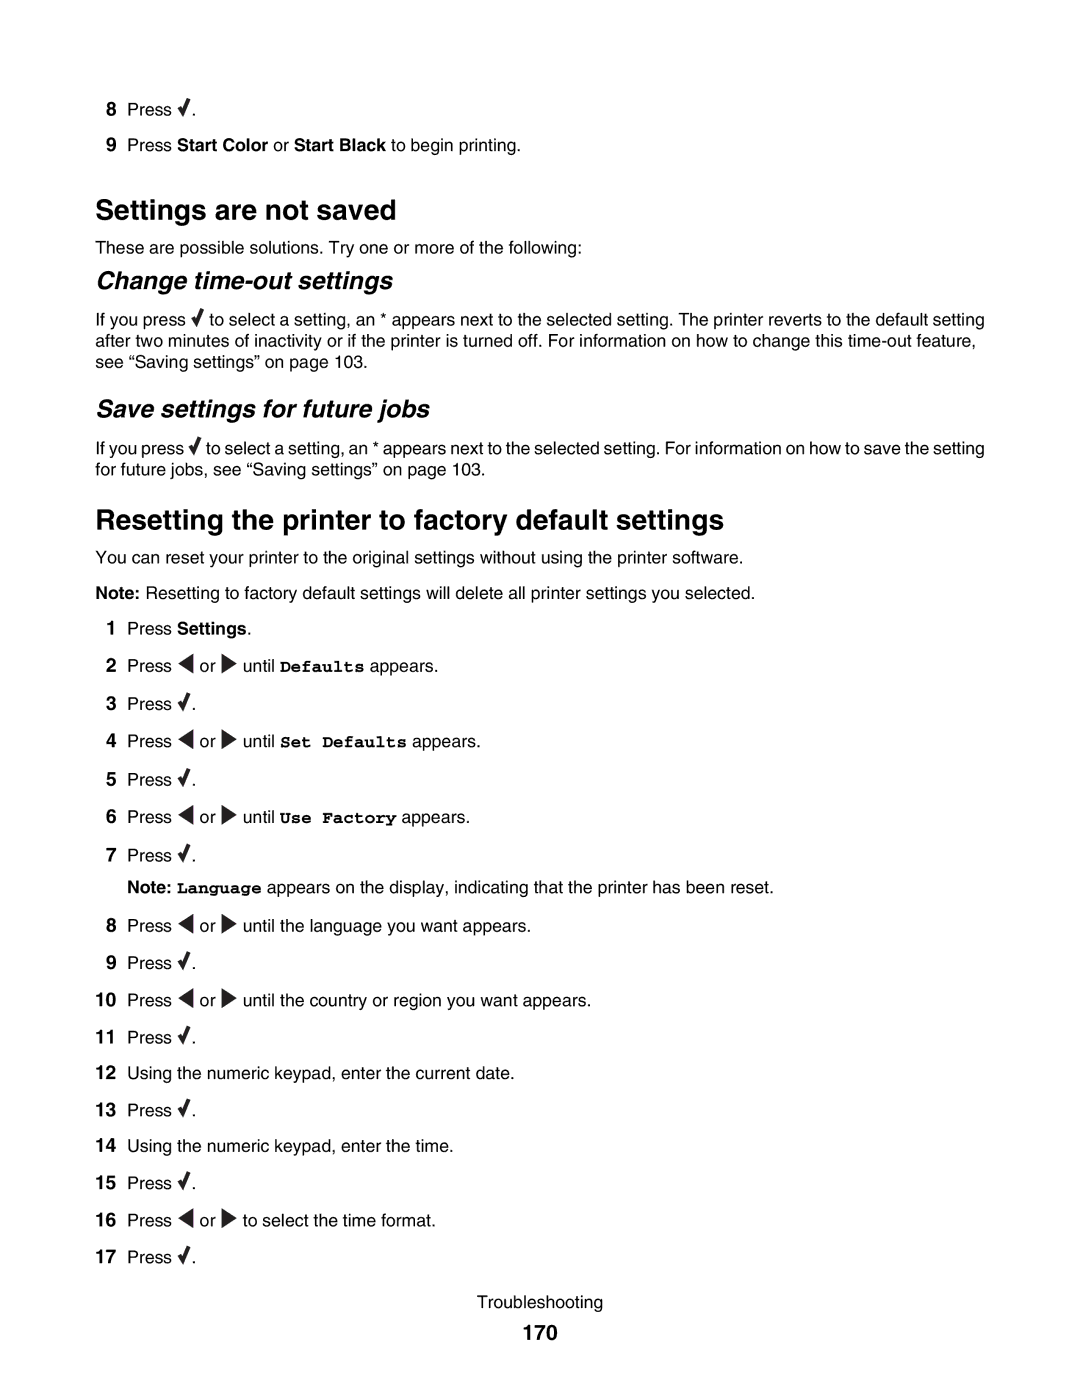 Lexmark 5000 Series Settings are not saved, Resetting the printer to factory default settings, Change time-out settings 